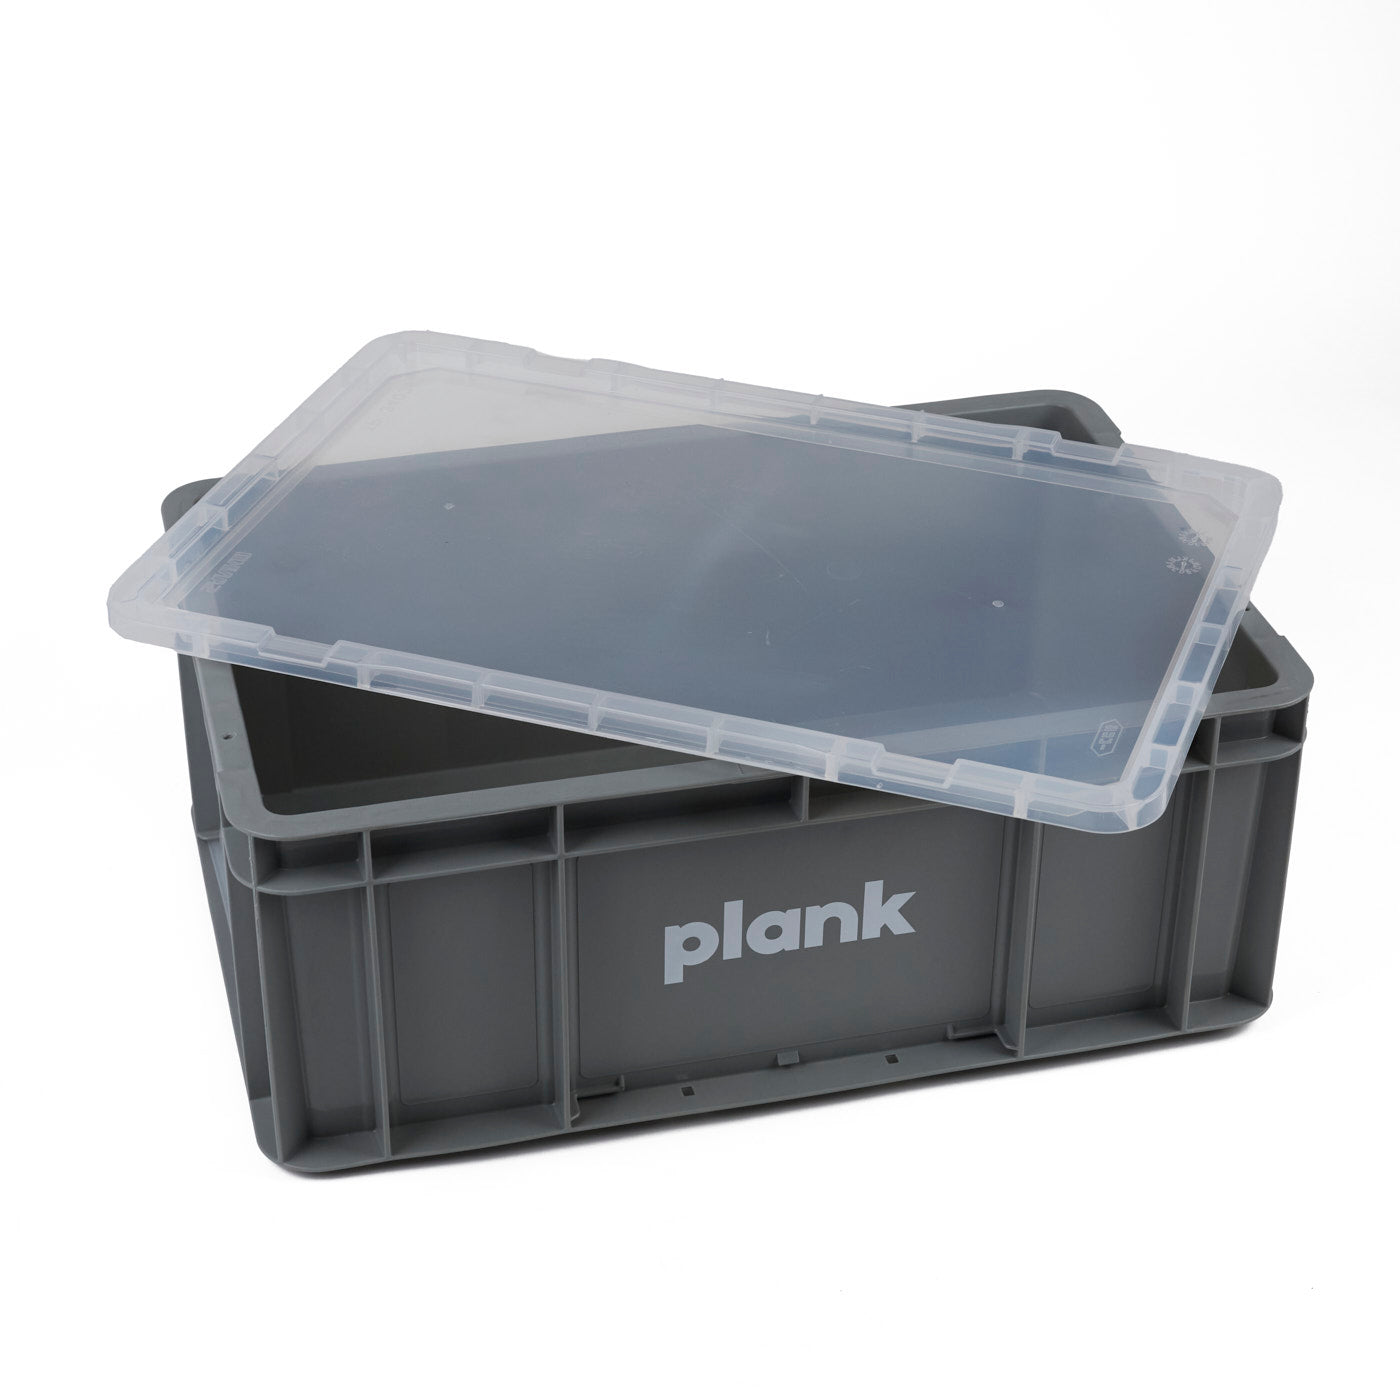 plank Storage Crates Covers